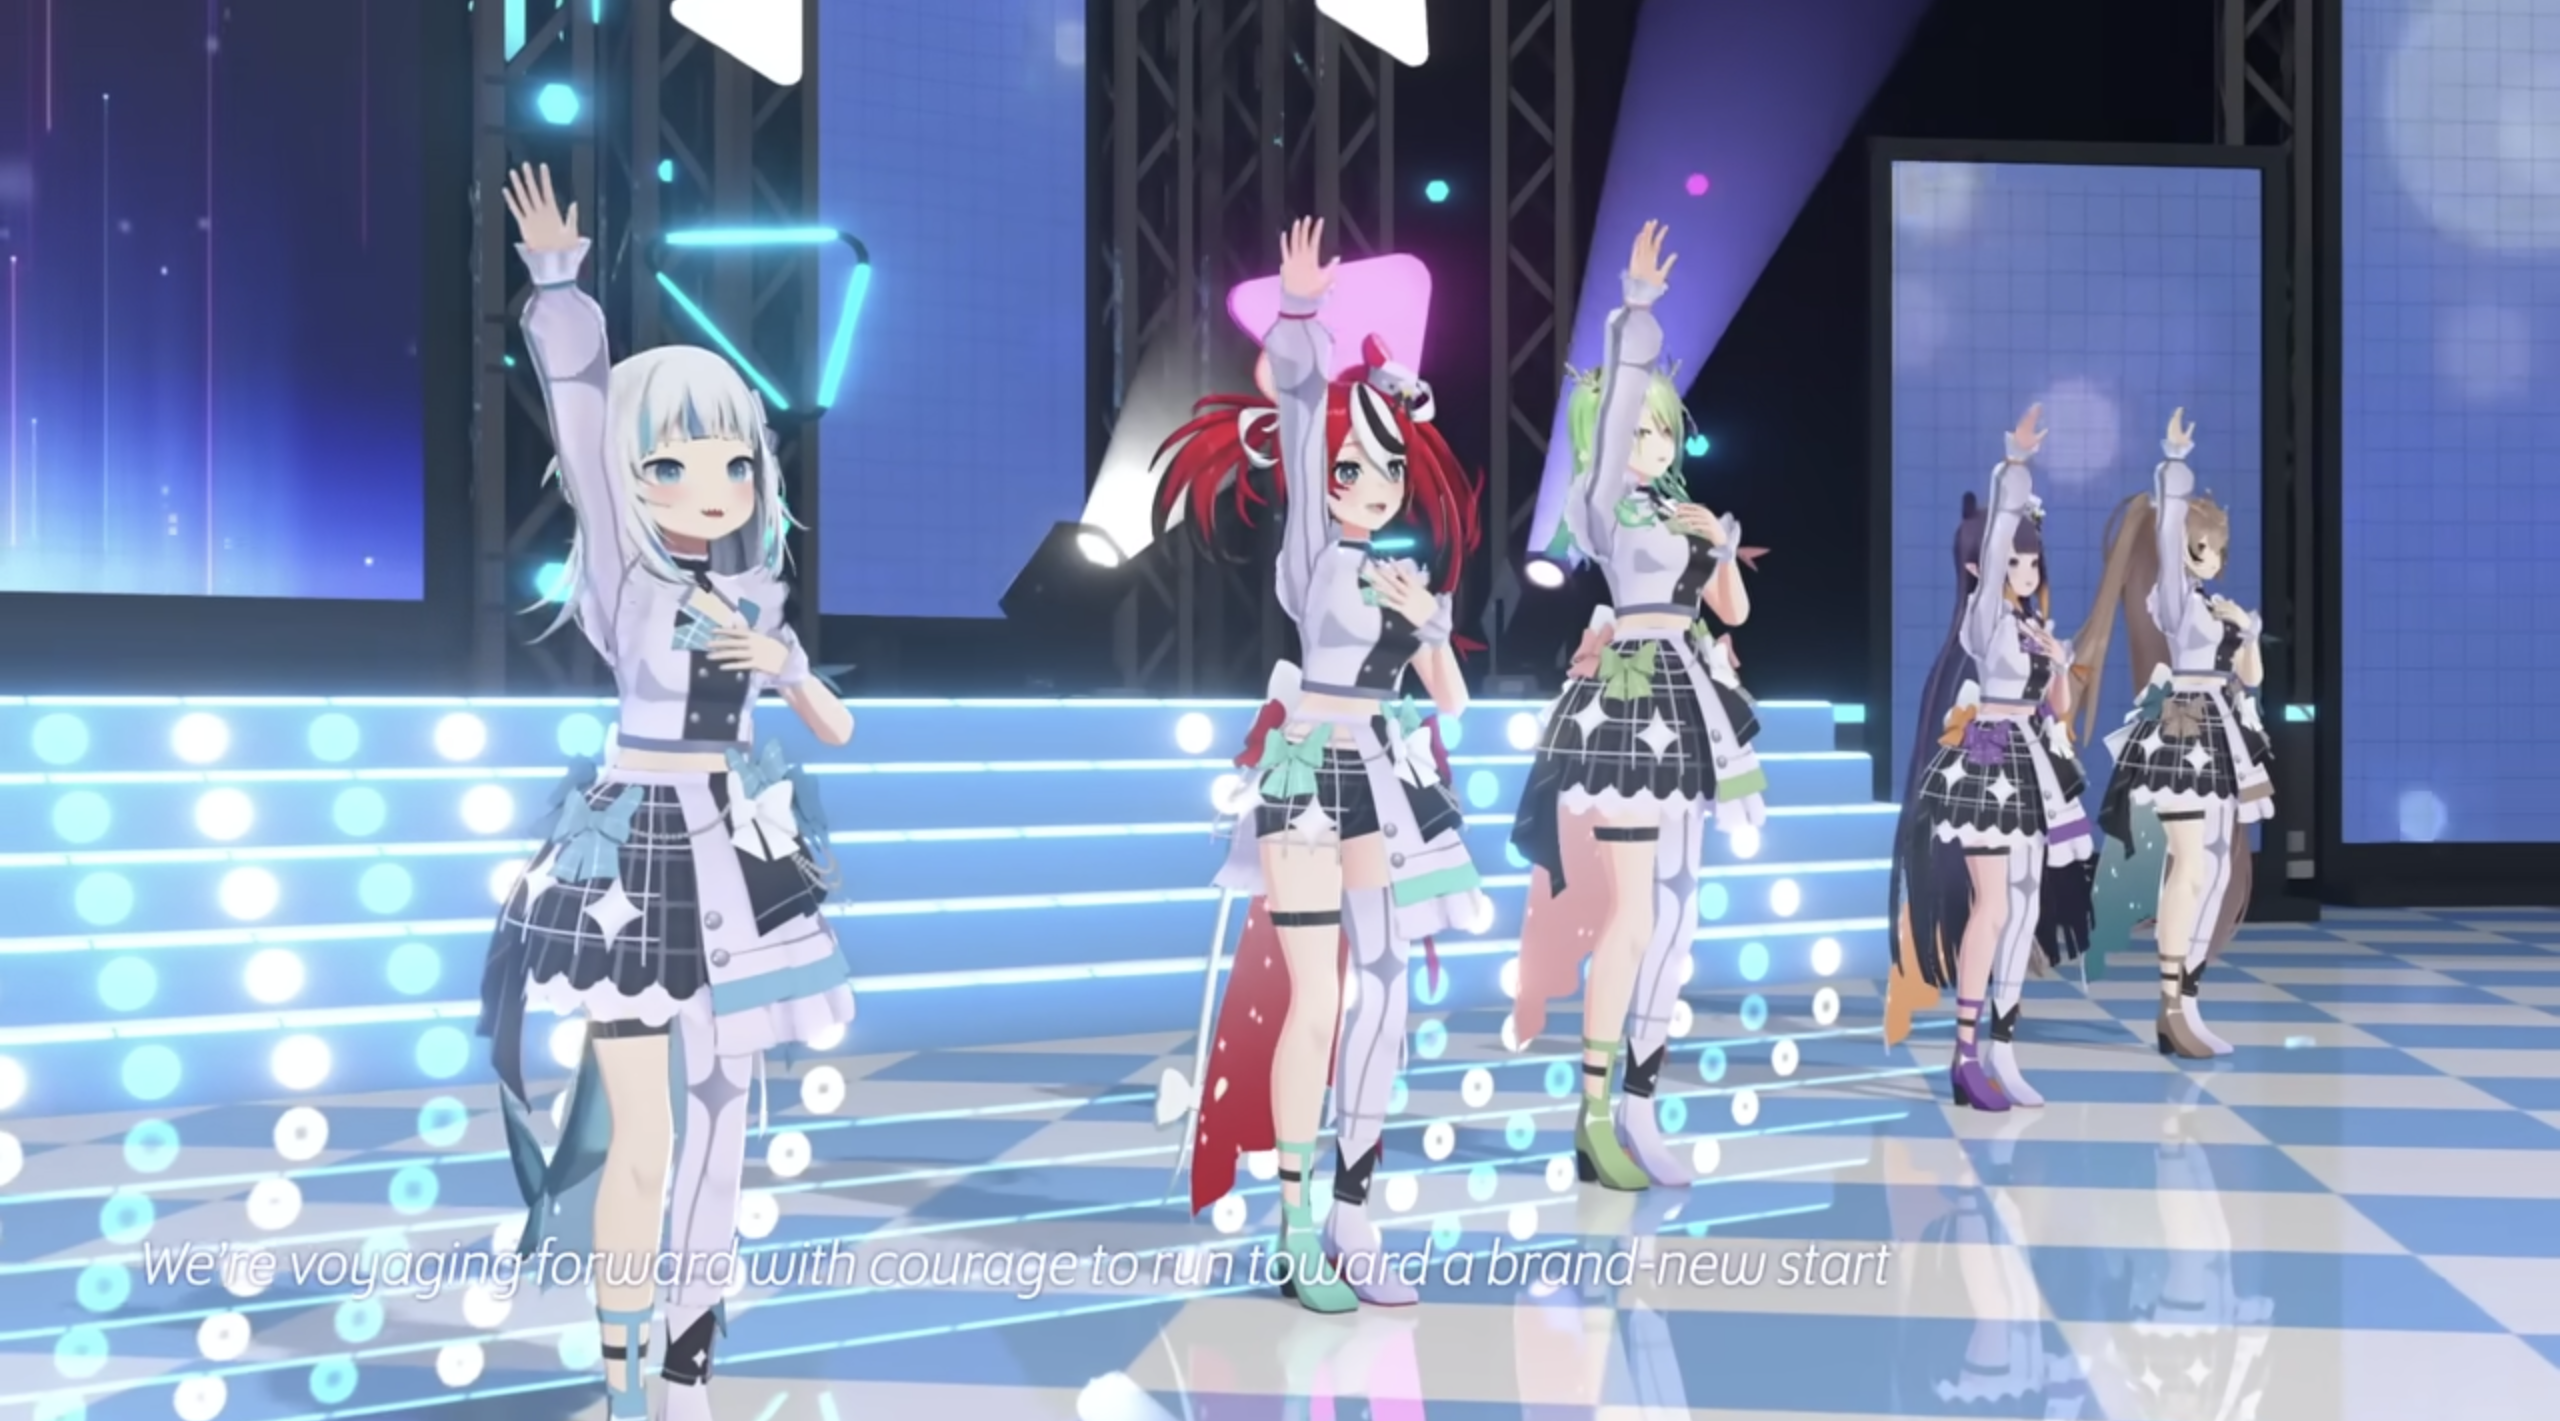 All Hololive English Vtubers Sing New Song Ahead of 1st Concert